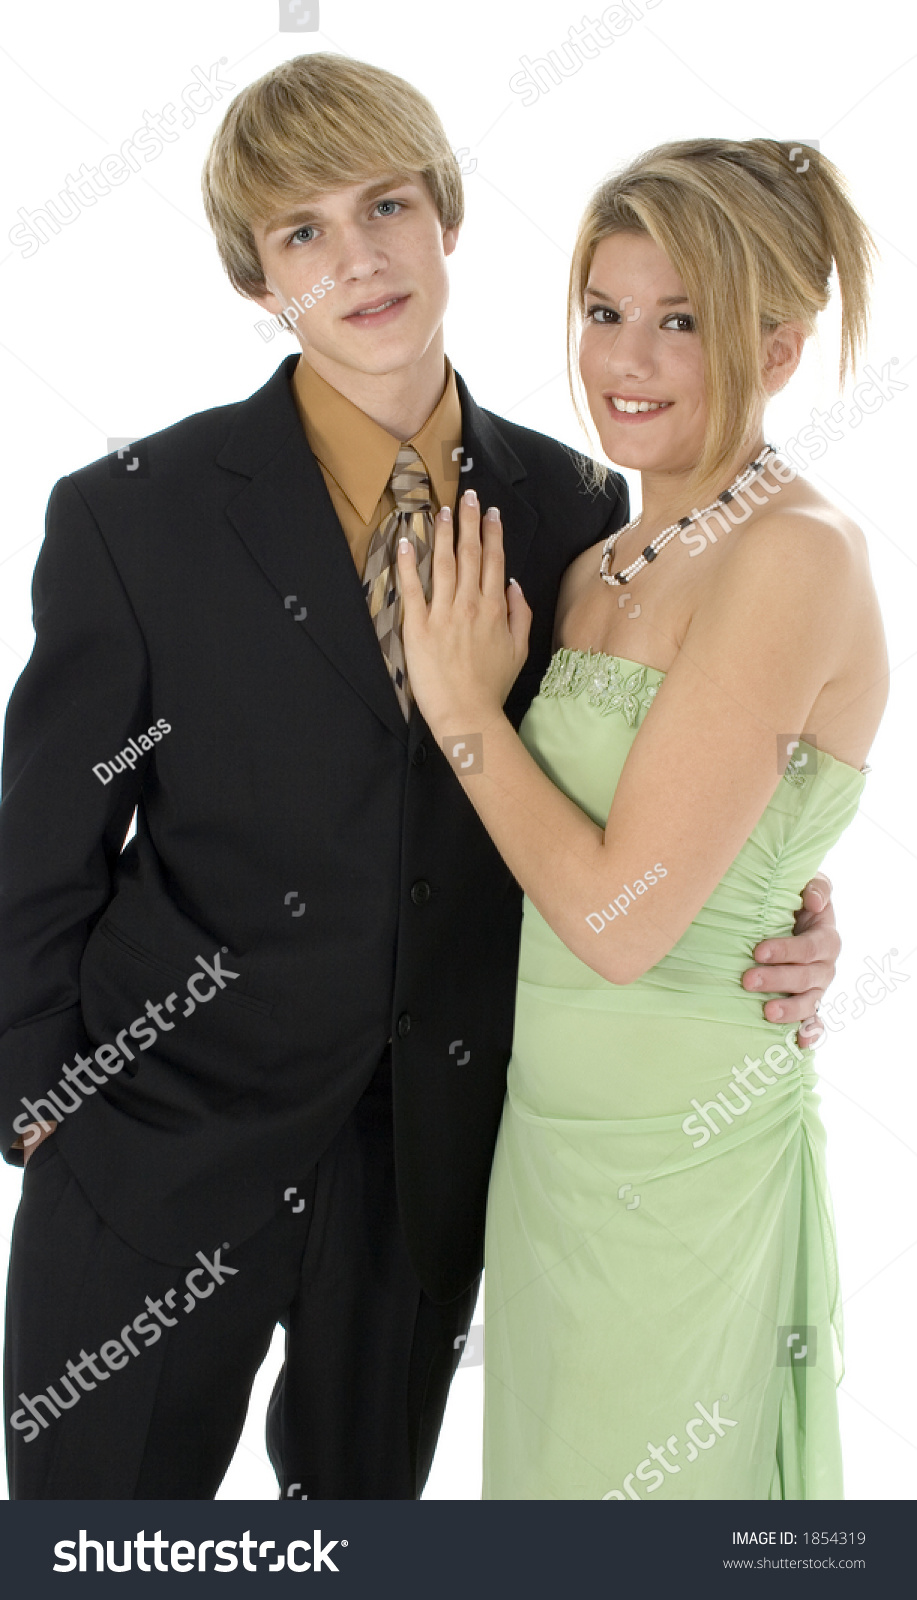 15 Year Old Teen Couple In Suit